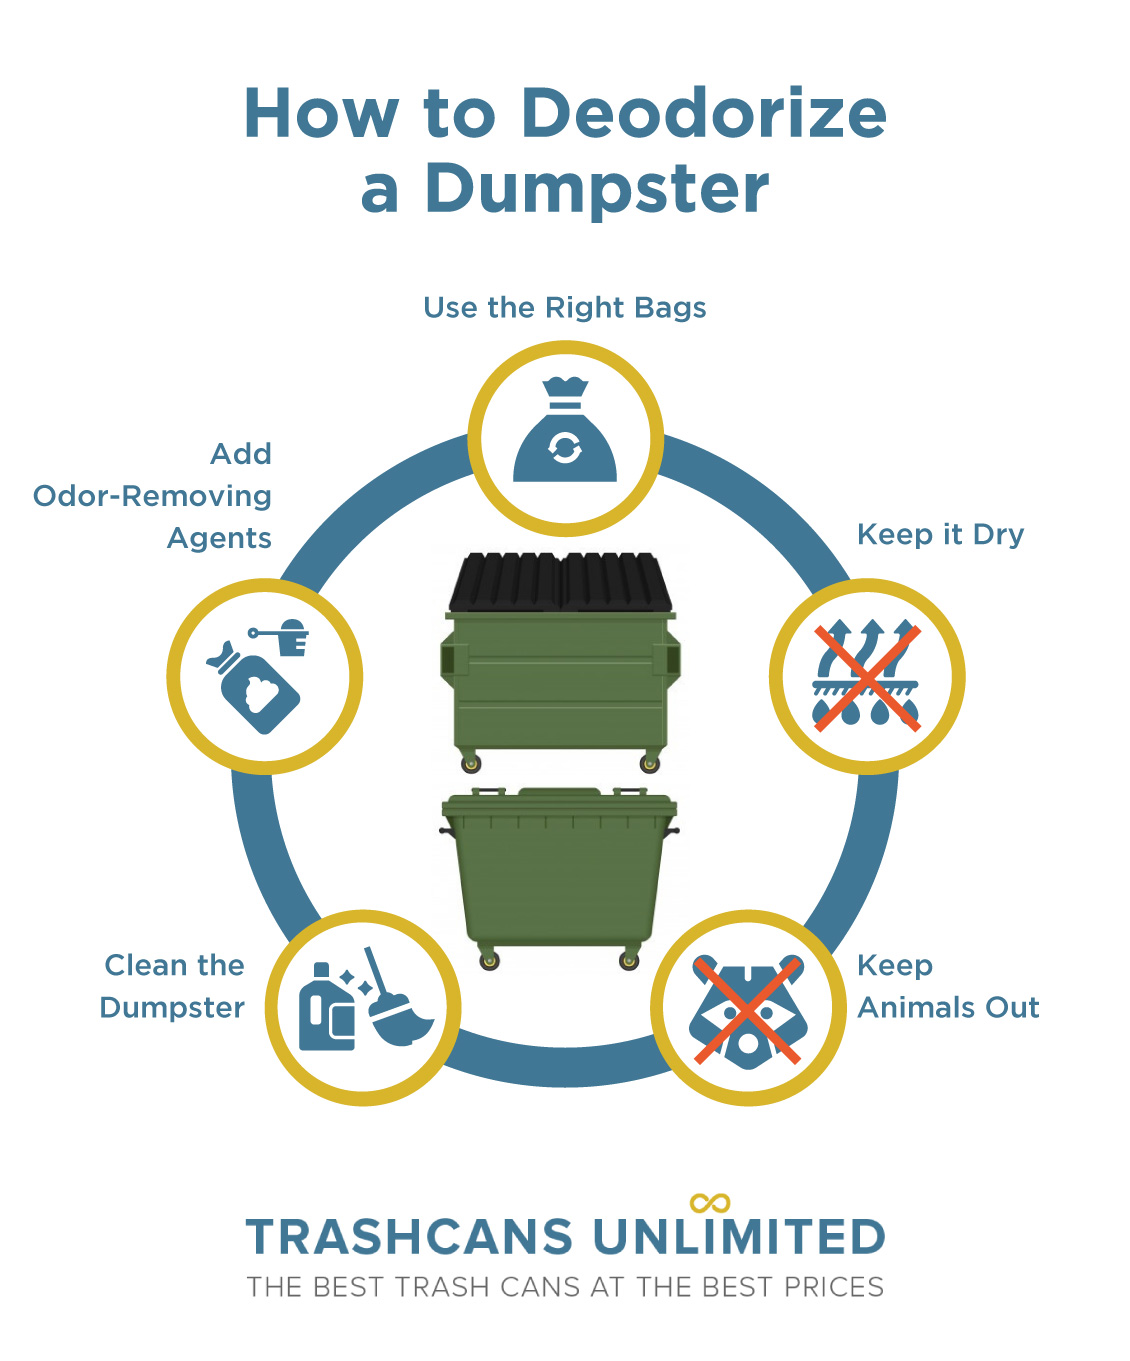 How to Deodorize a Dumpster